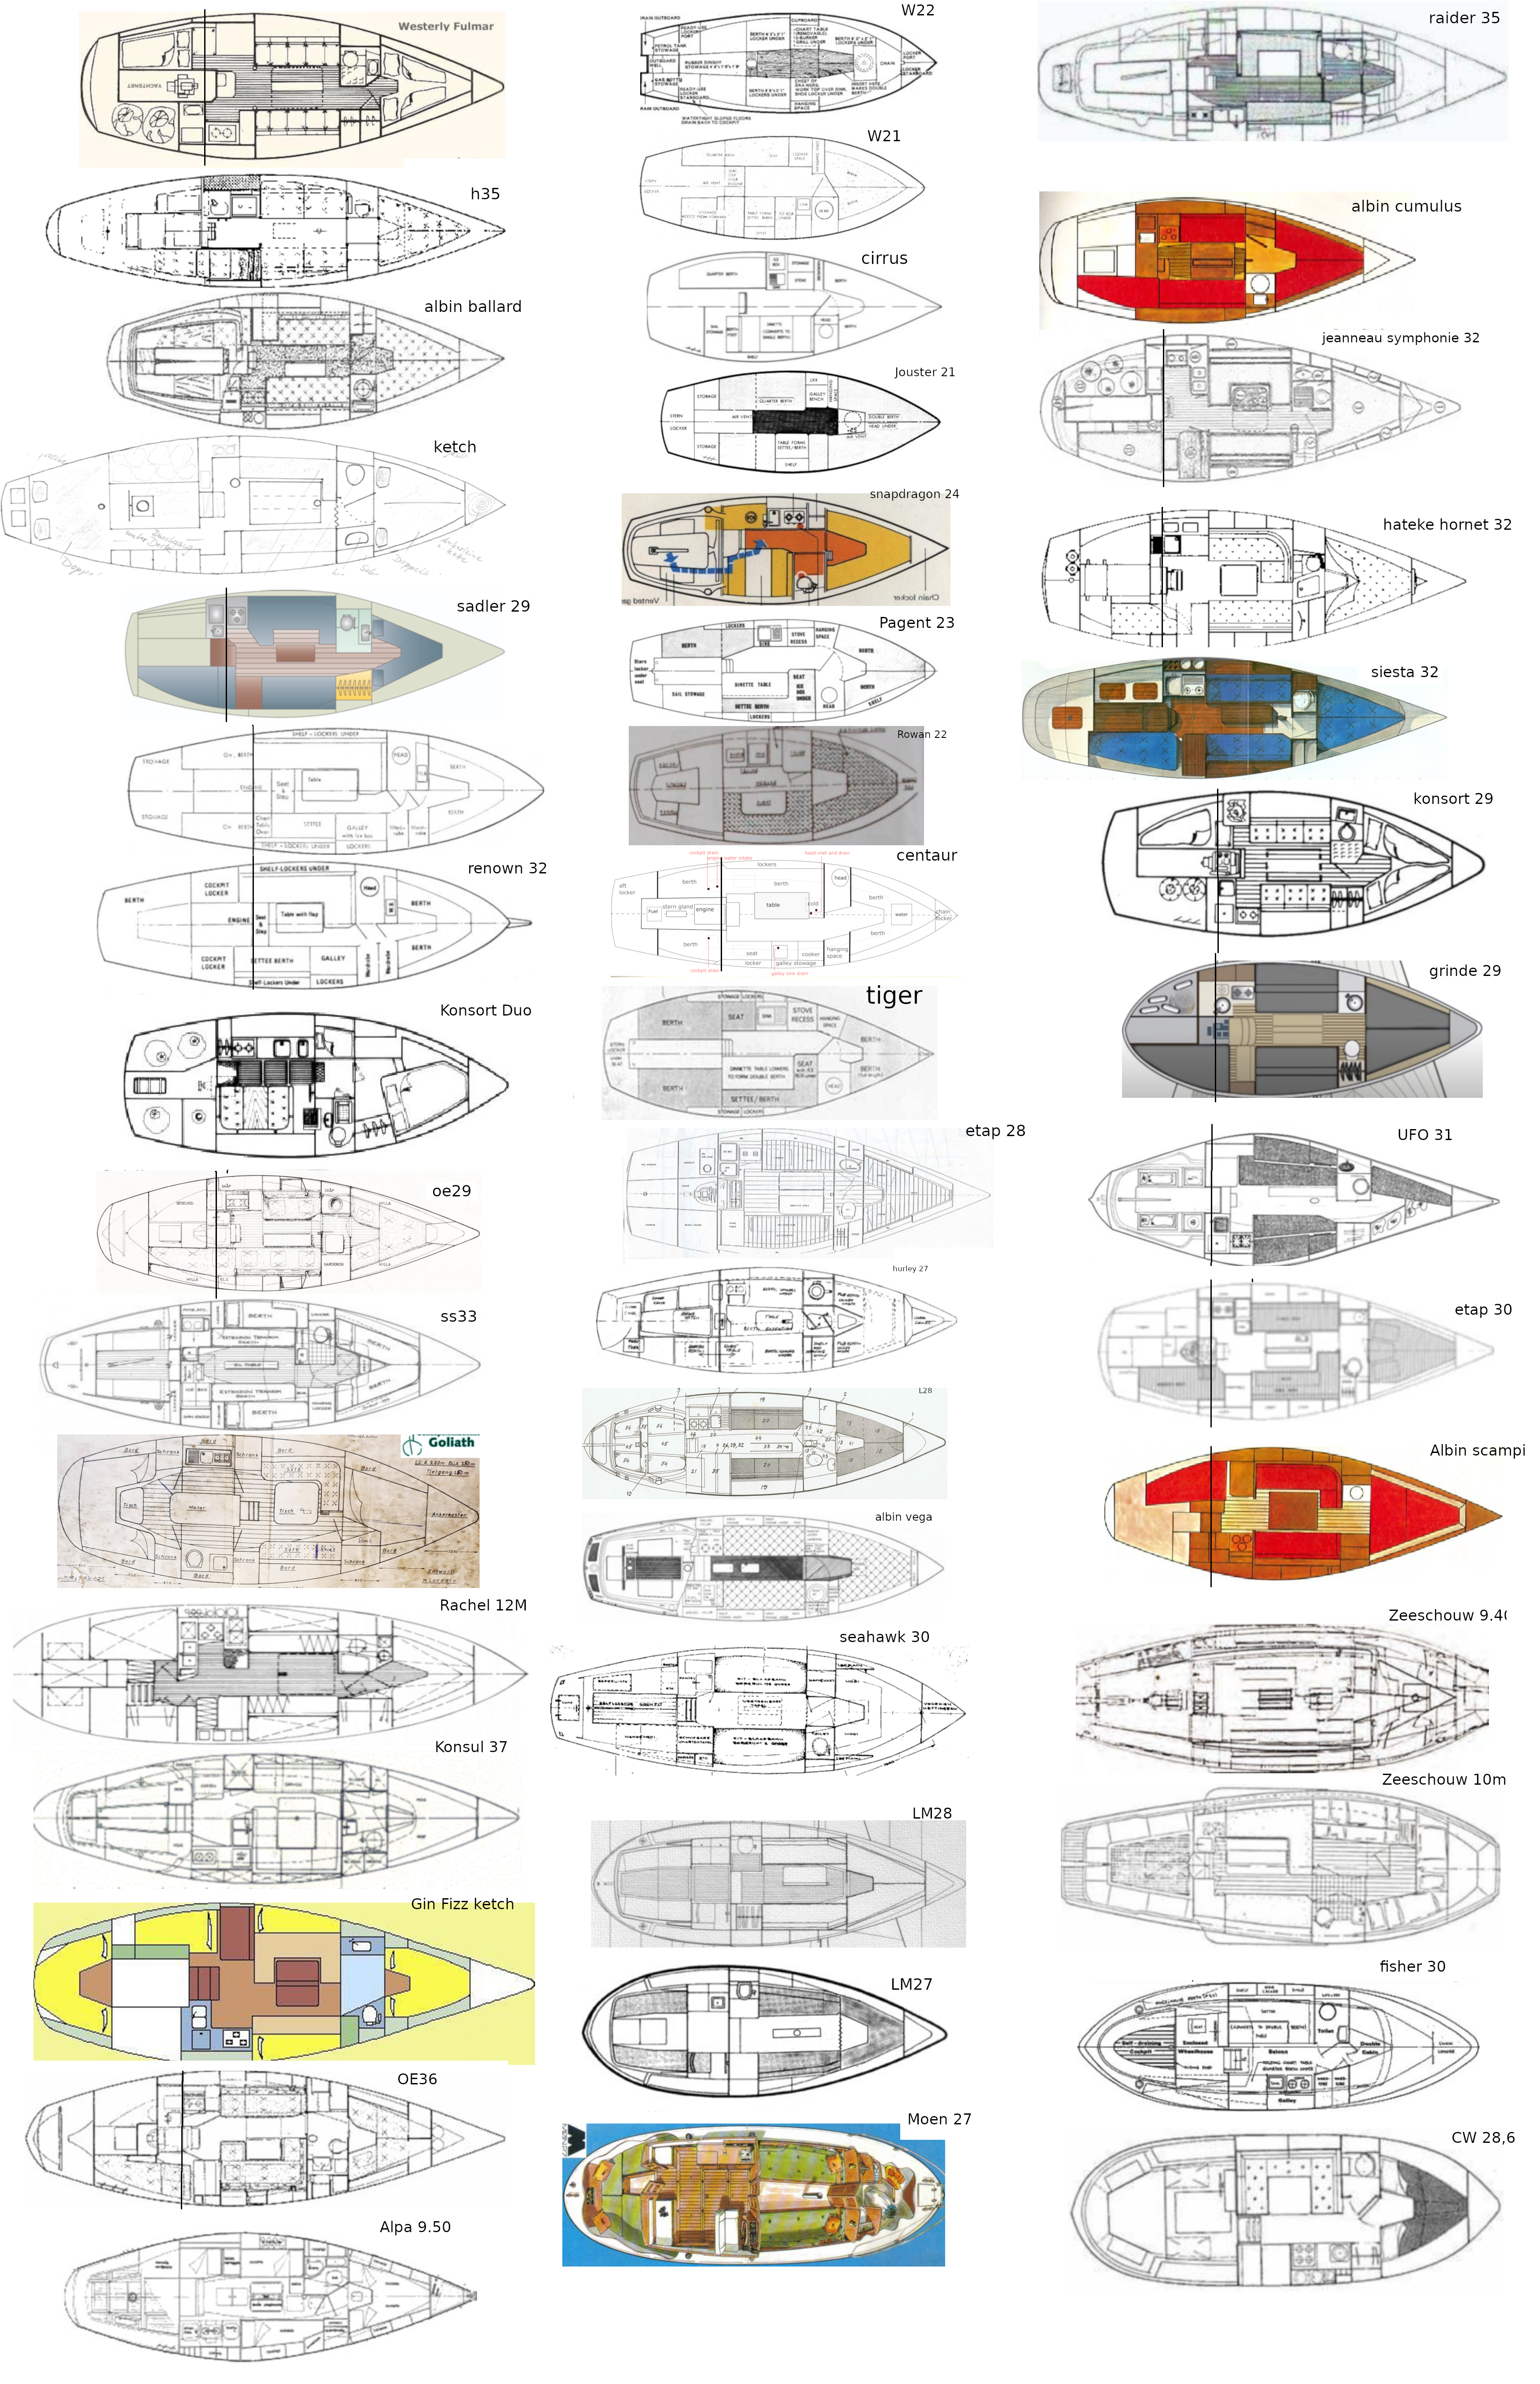 image of sailboats all scaled to size